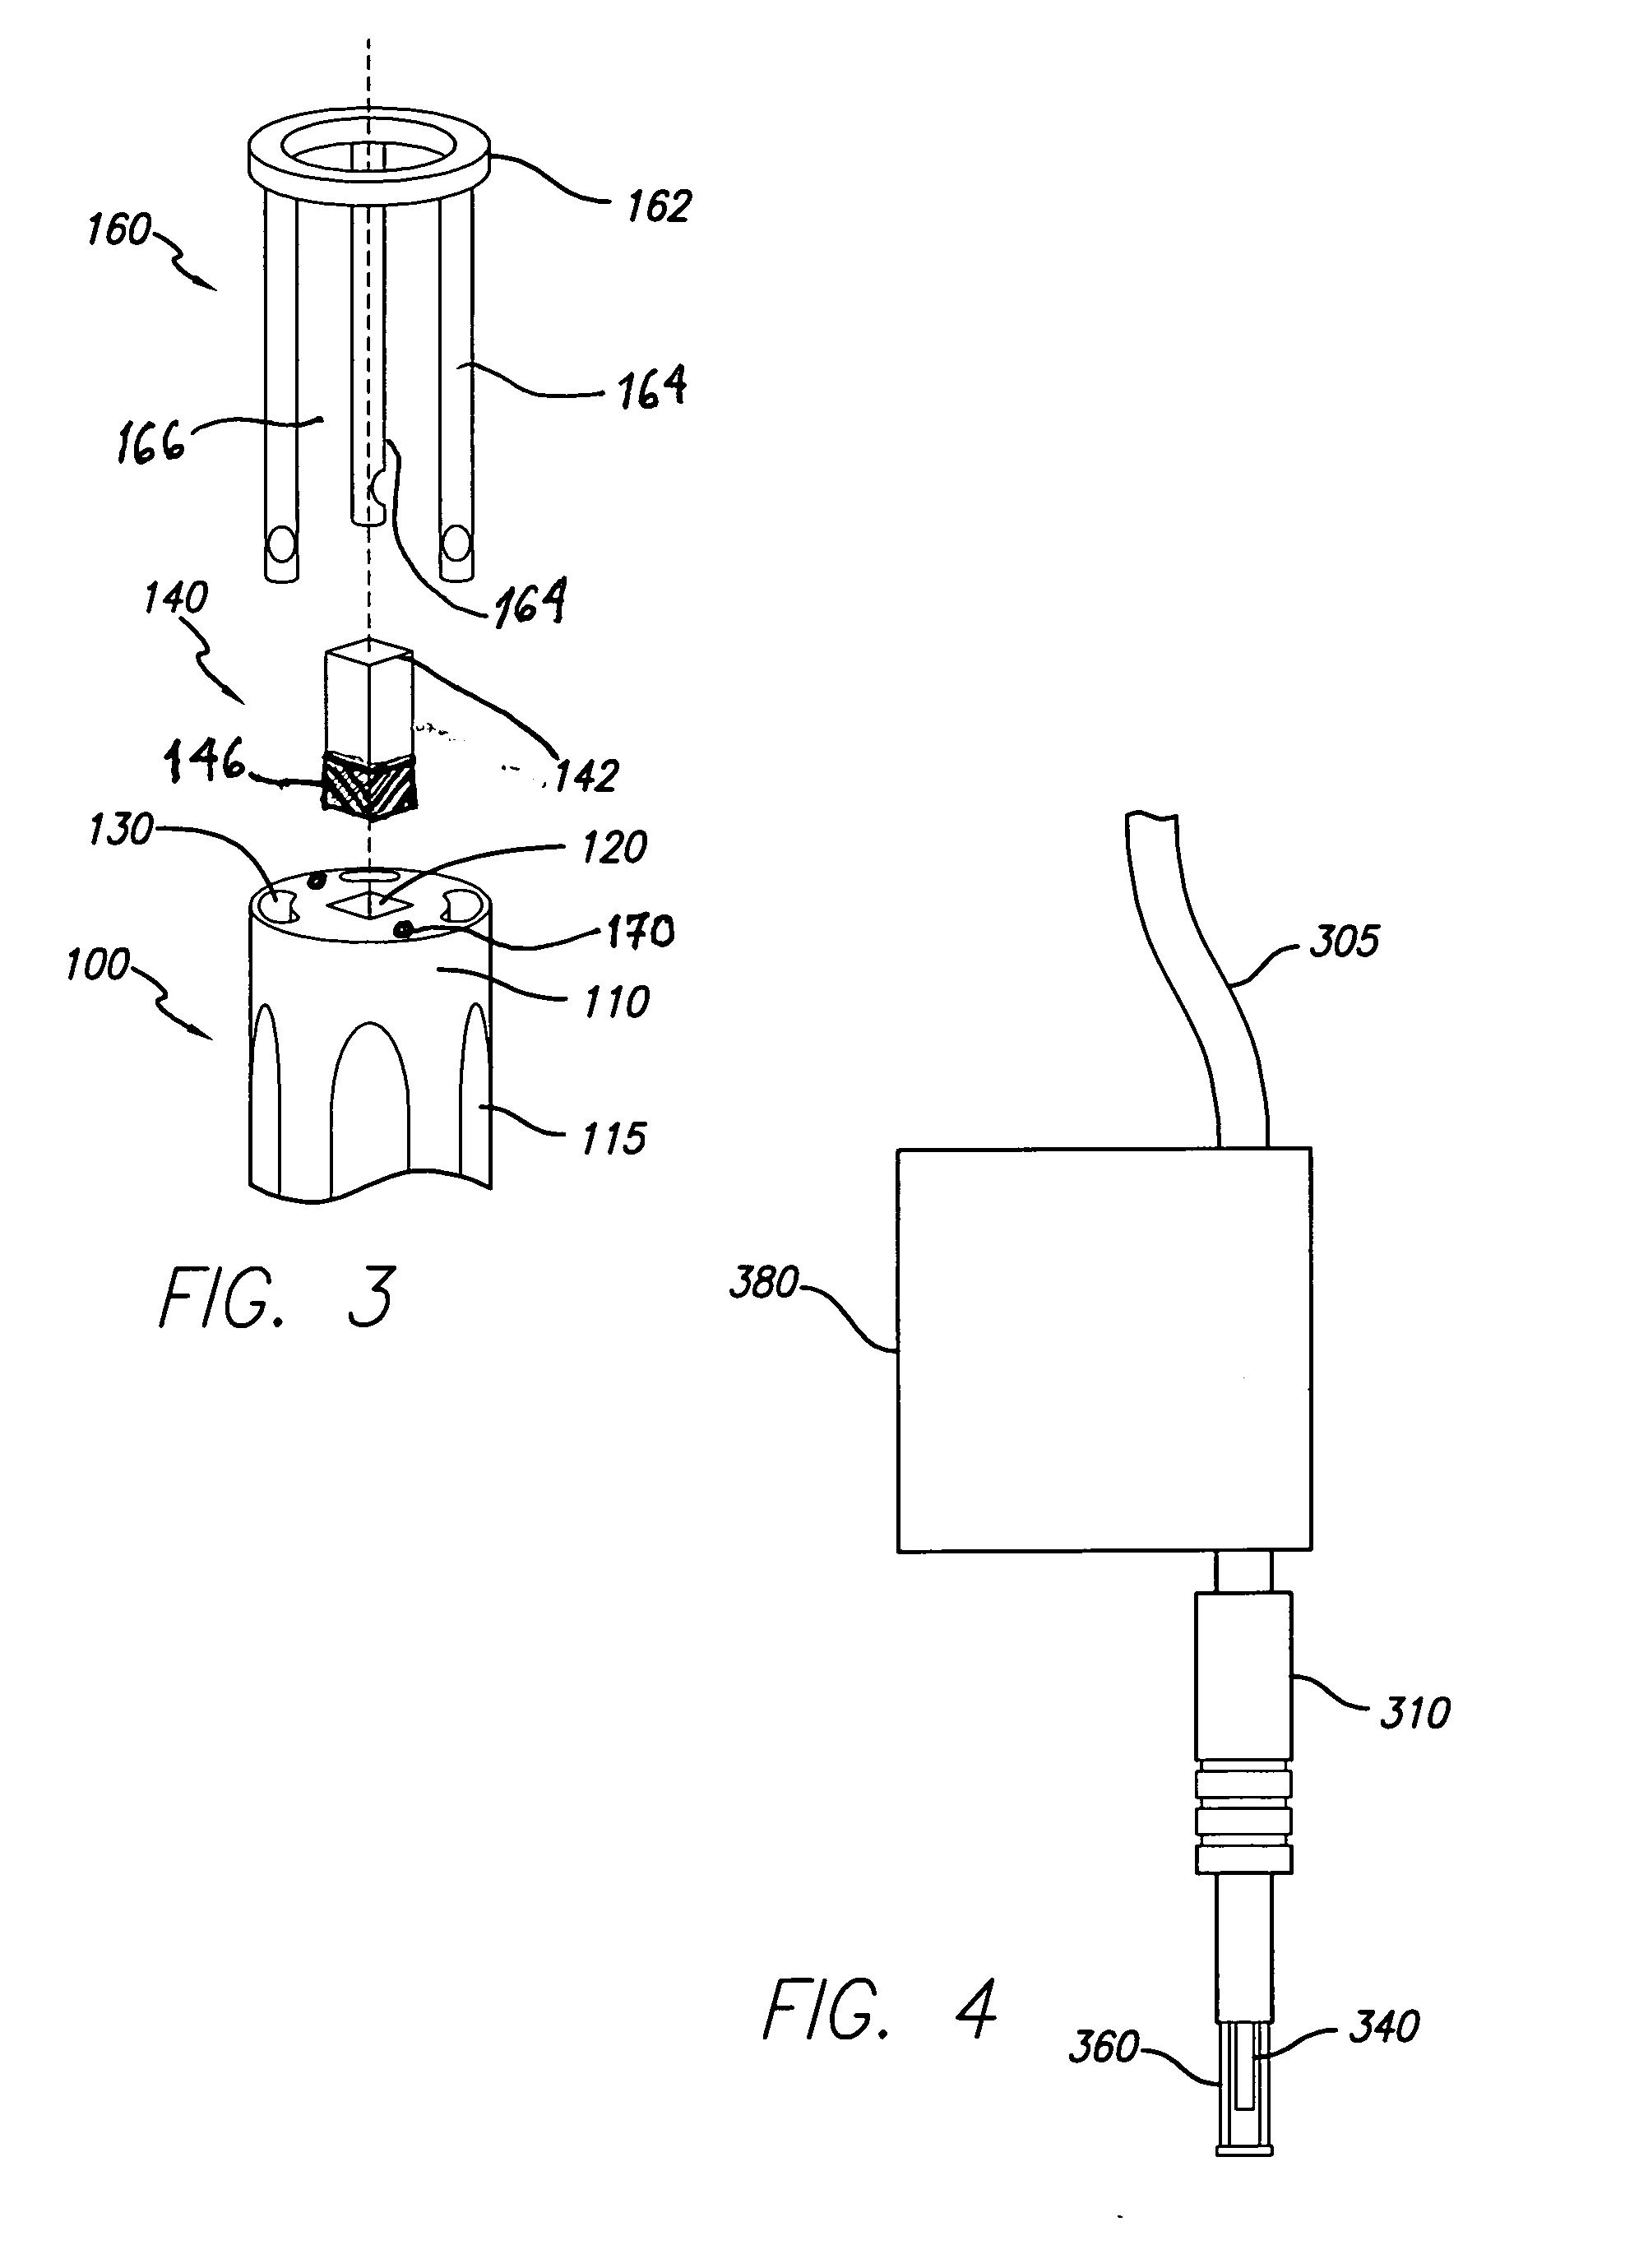 Apparatus and method for using intense pulsed light to non-invasively treat conjunctival blood vessels, pigmented lesions, and other problems